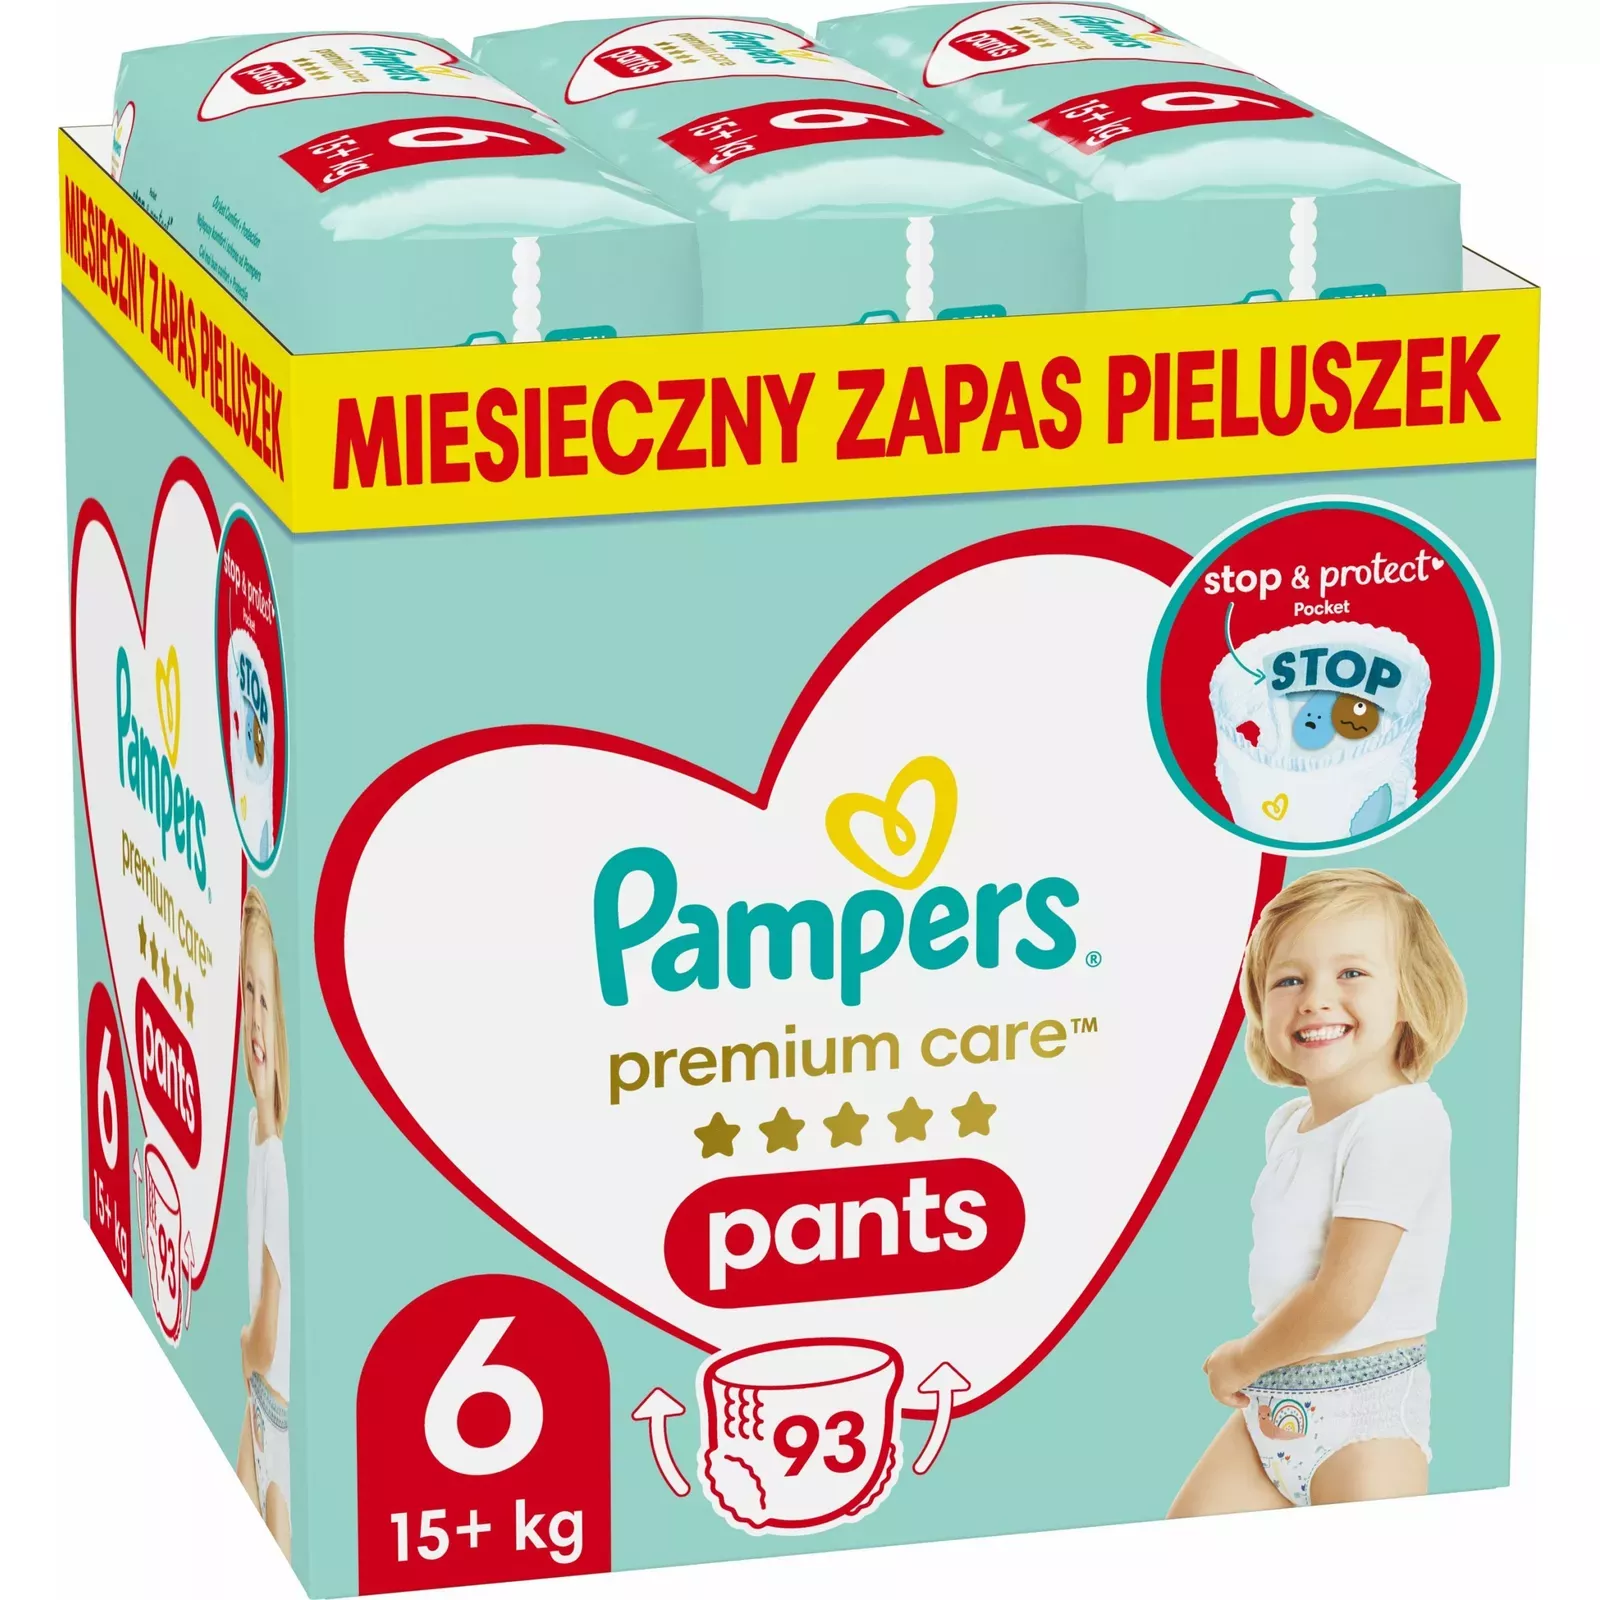 pampers giant box size 3